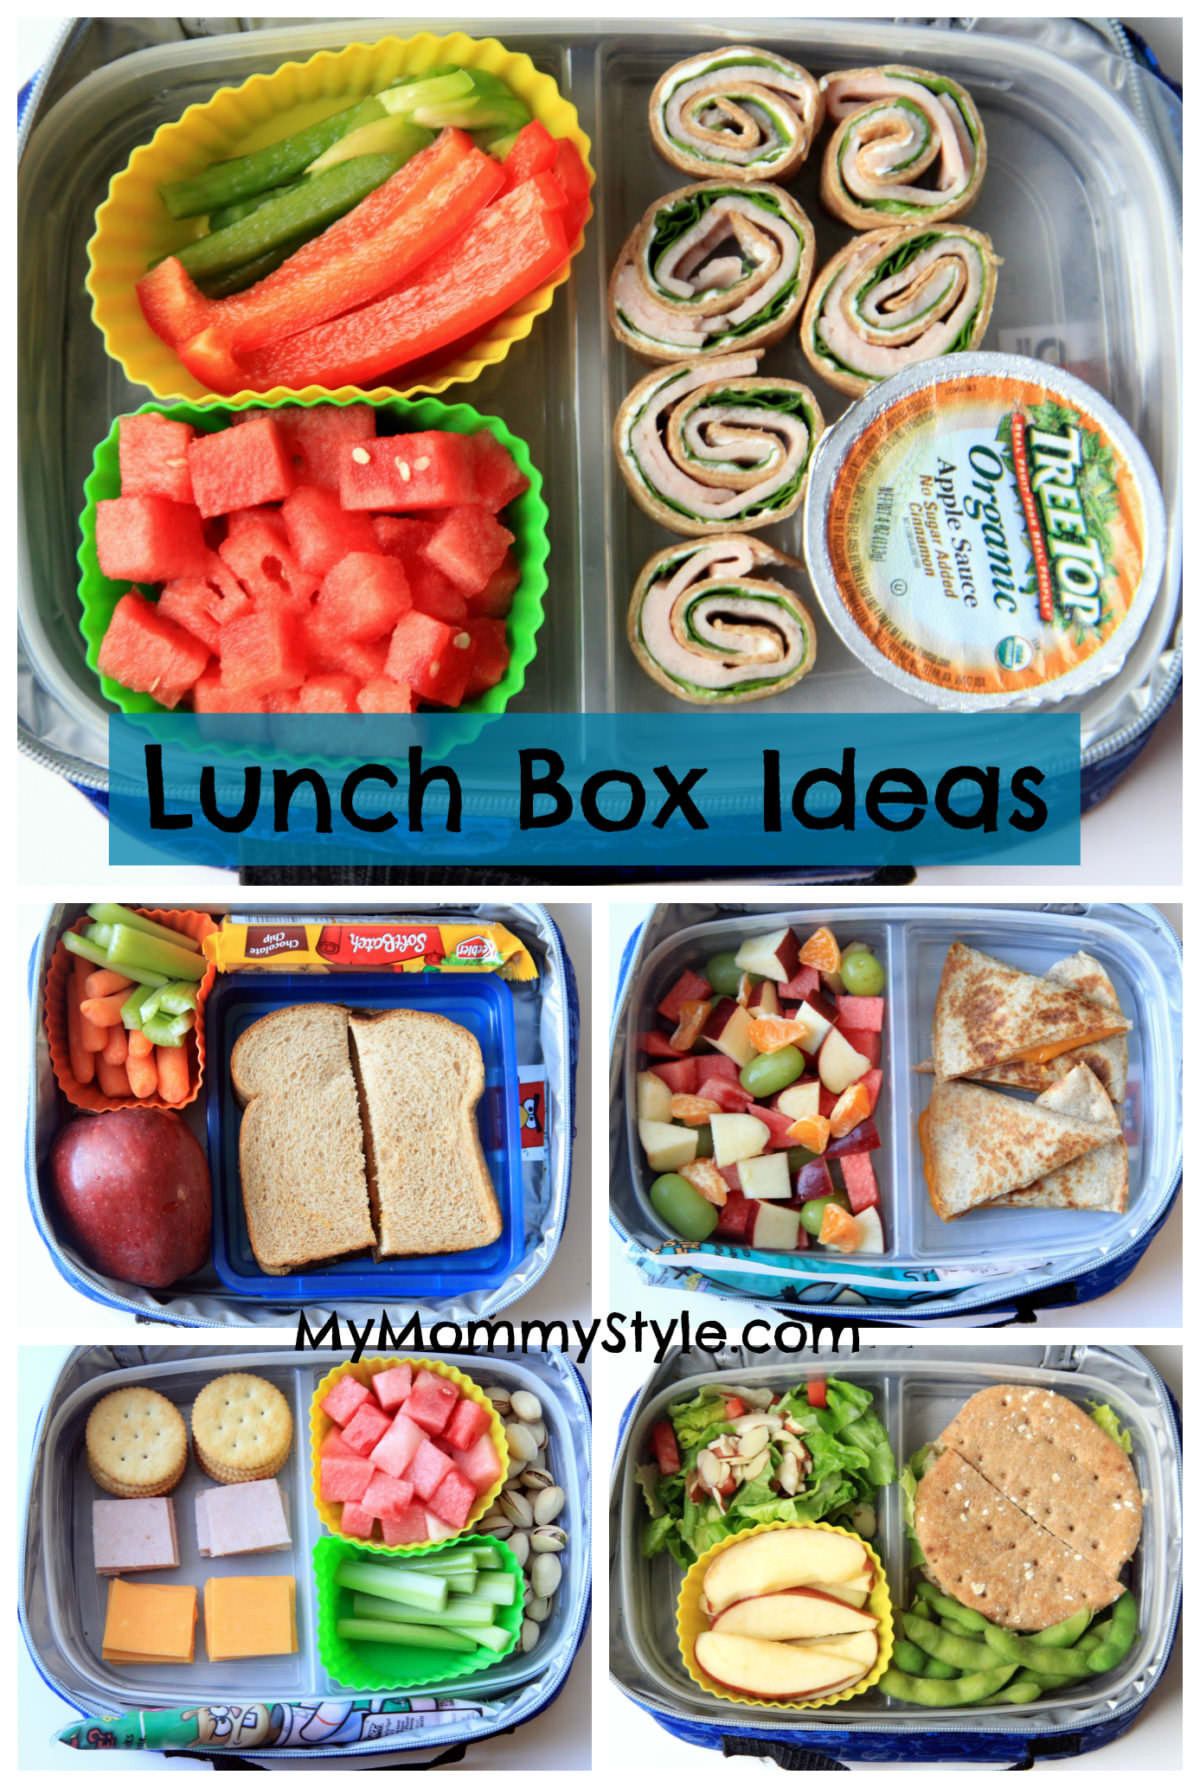 Healthy Snacks For Kids Lunch Boxes
 The best after school snacks for kids My Mommy Style